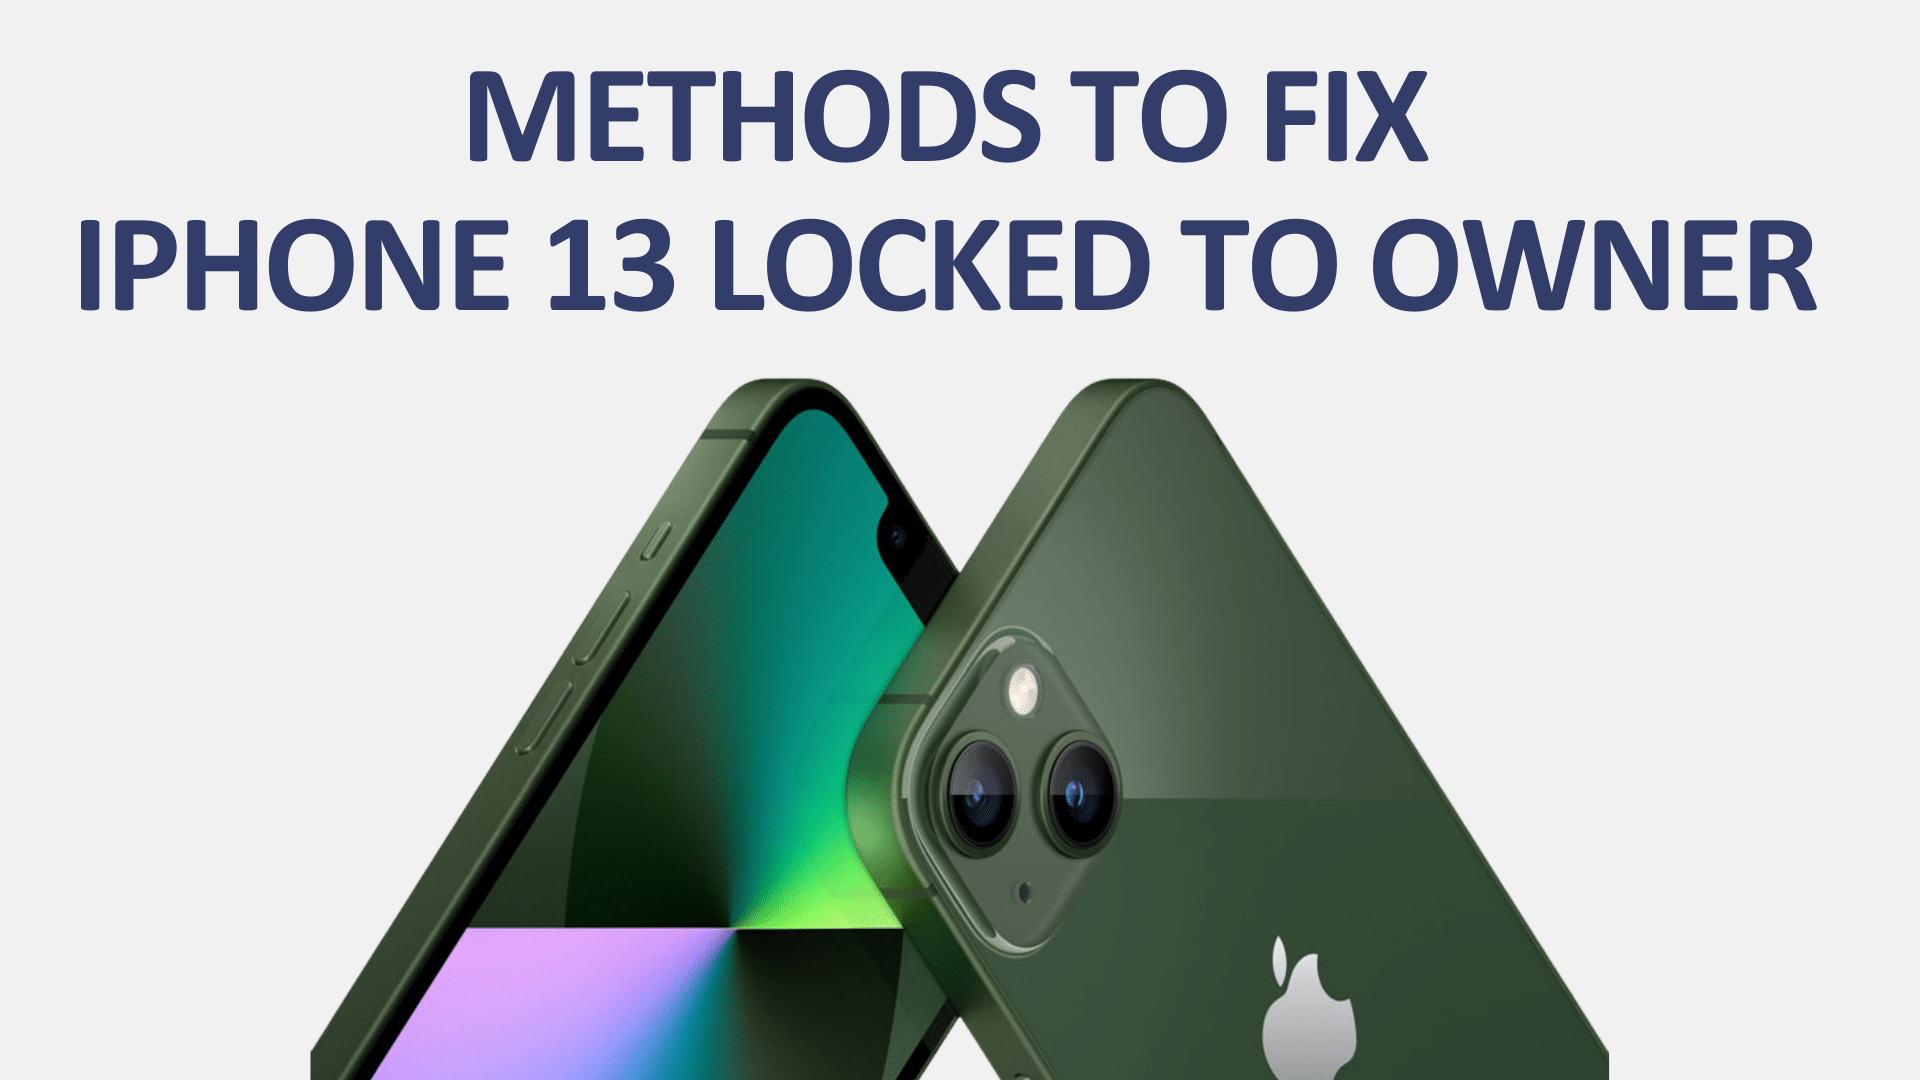 Methods to Fix iPhone 13 Locked to Owner Message